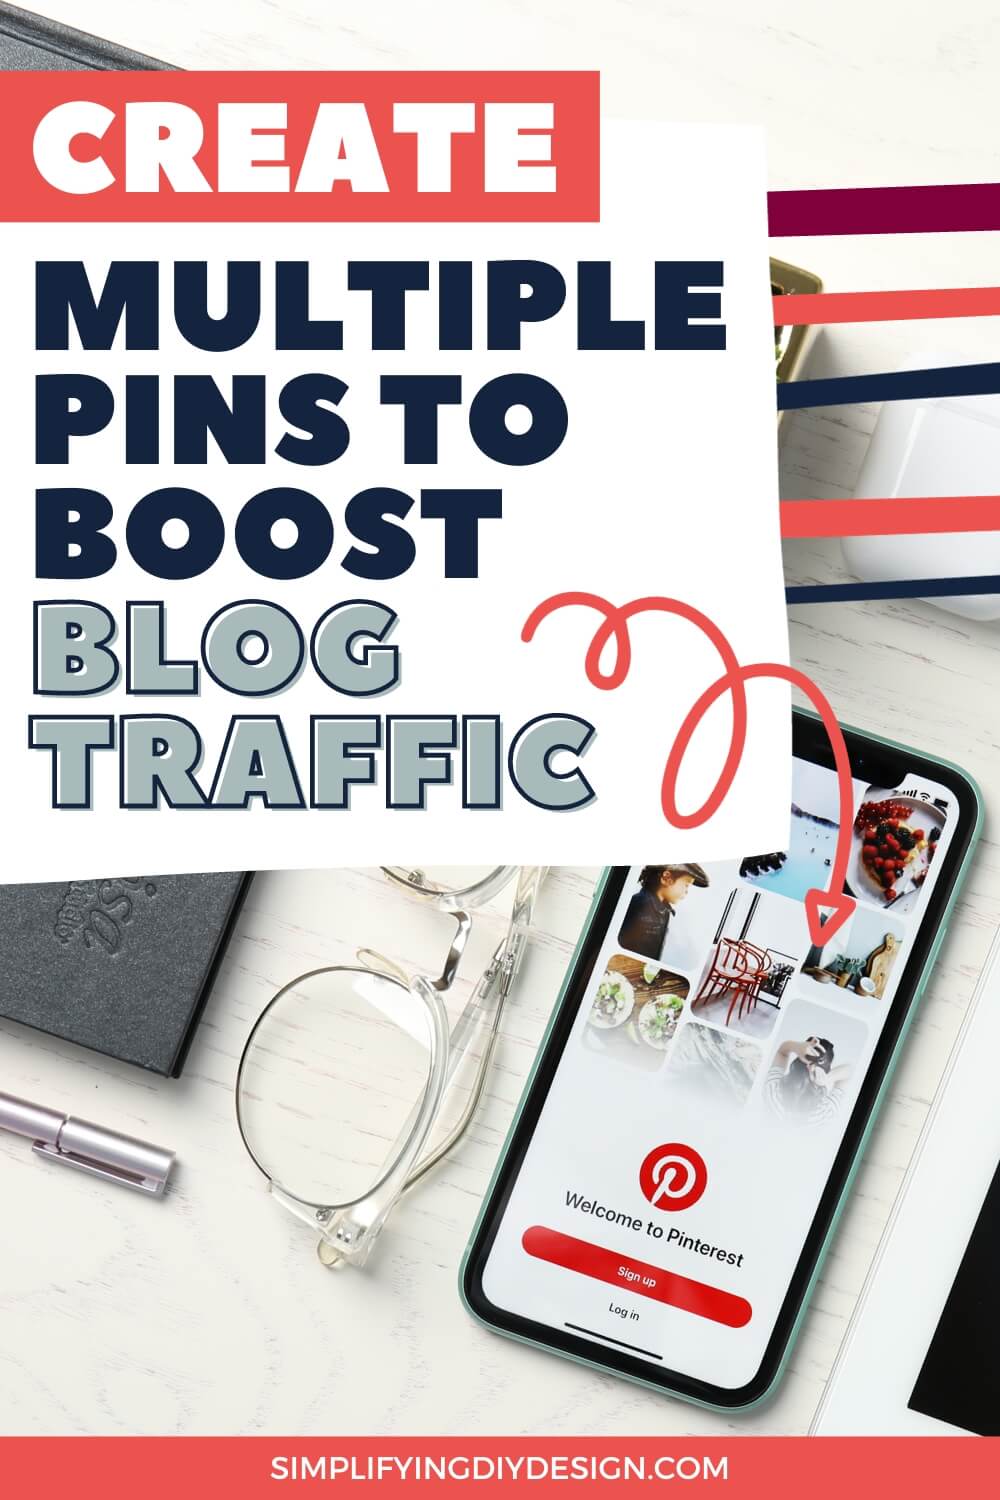 Let's talk about how bloggers can (and should!) create multiple pins to drive blog traffic to blog posts, sales pages, opt-in pages, and MORE!